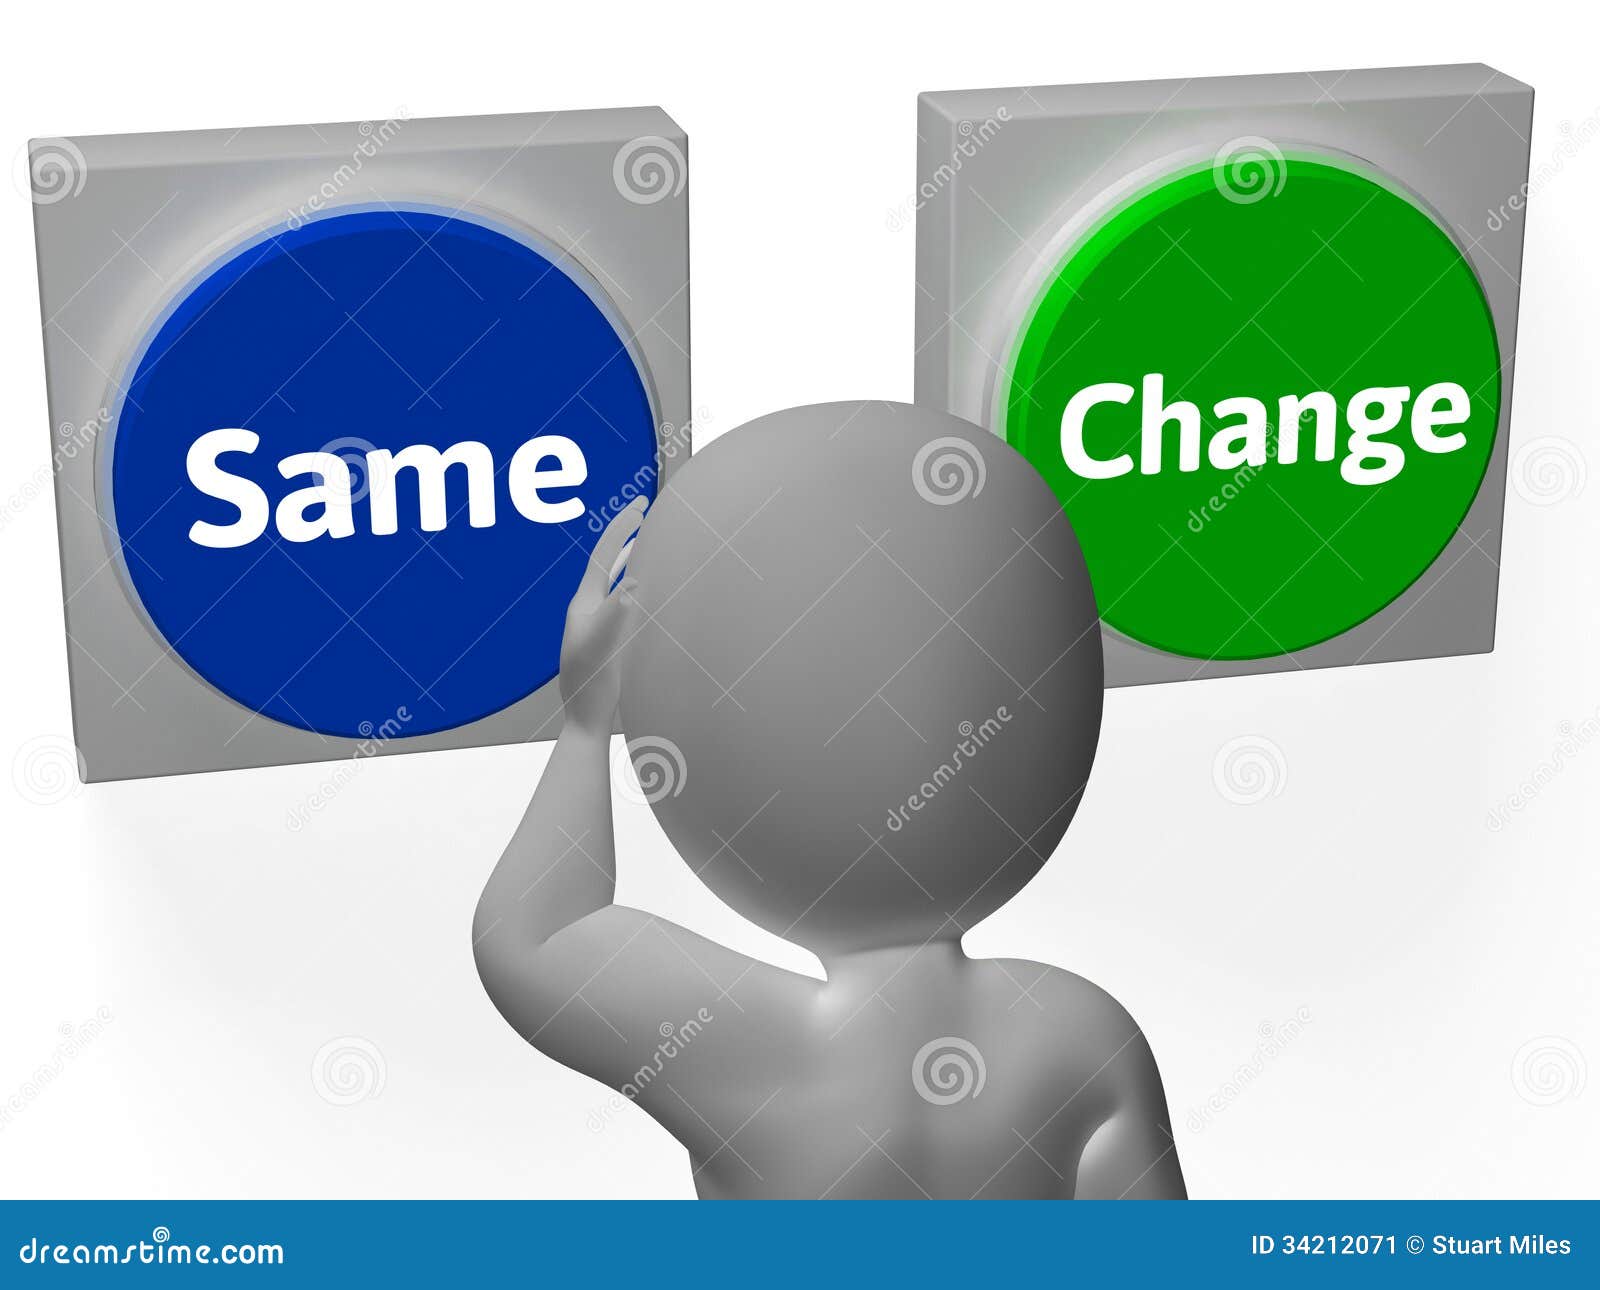 same change buttons show innovating or changing